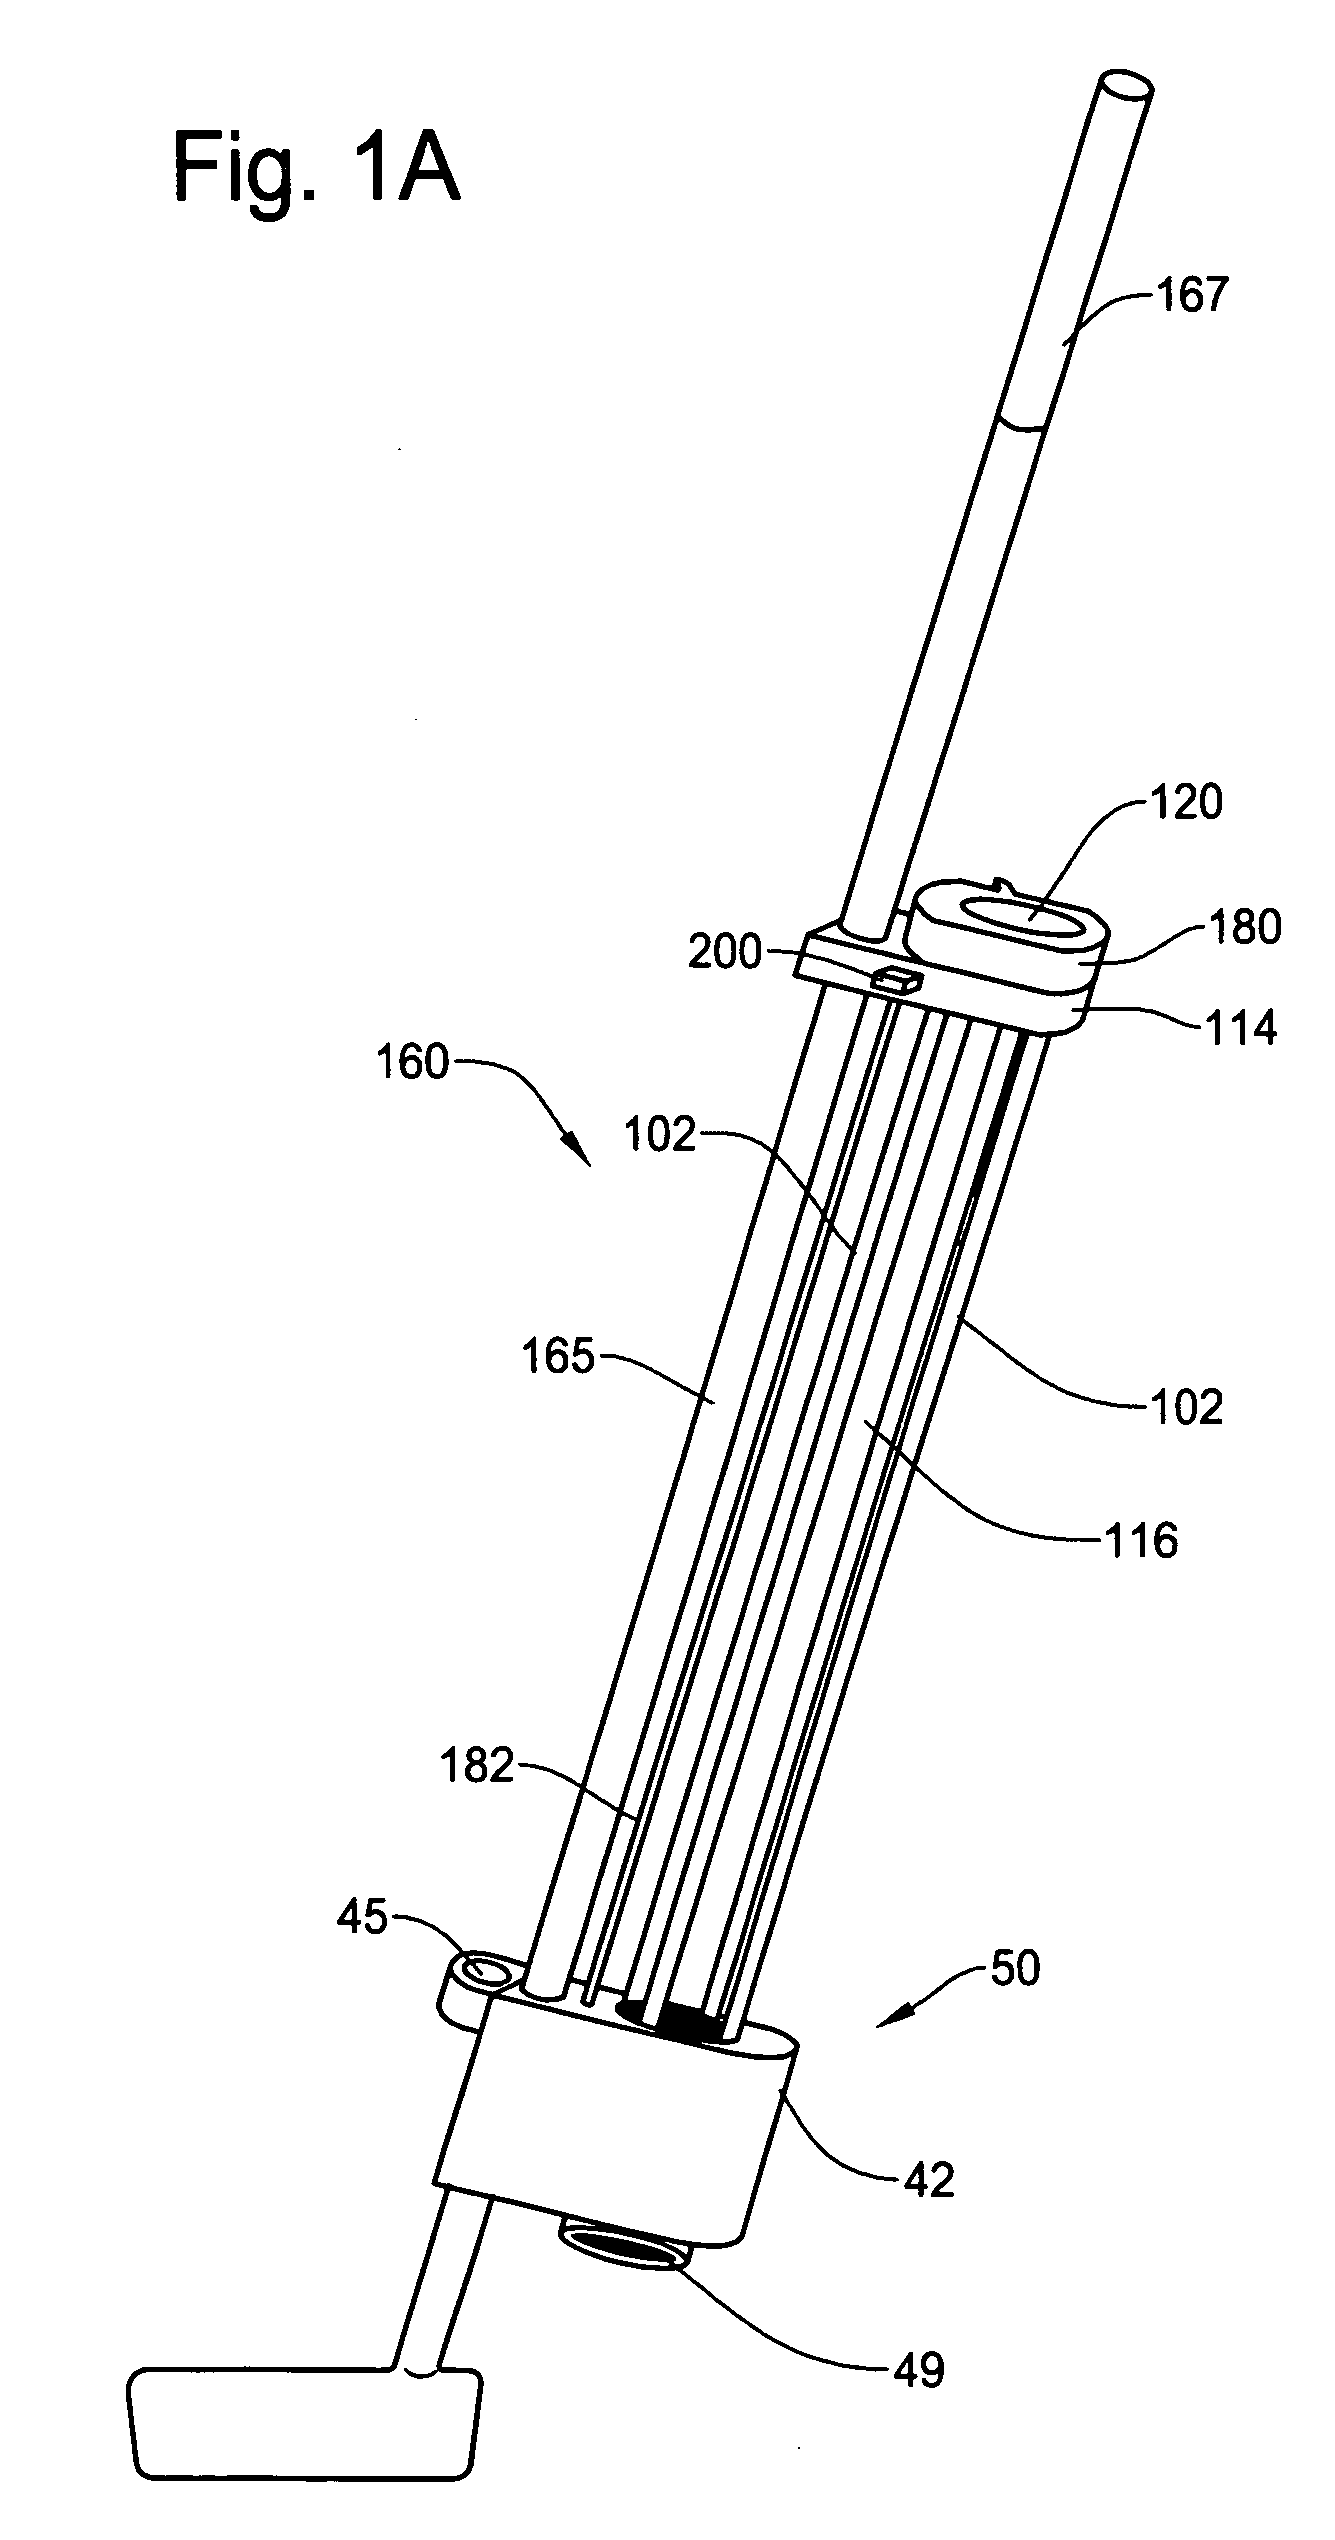 Game apparatus having ball drop and pick-up mechanism